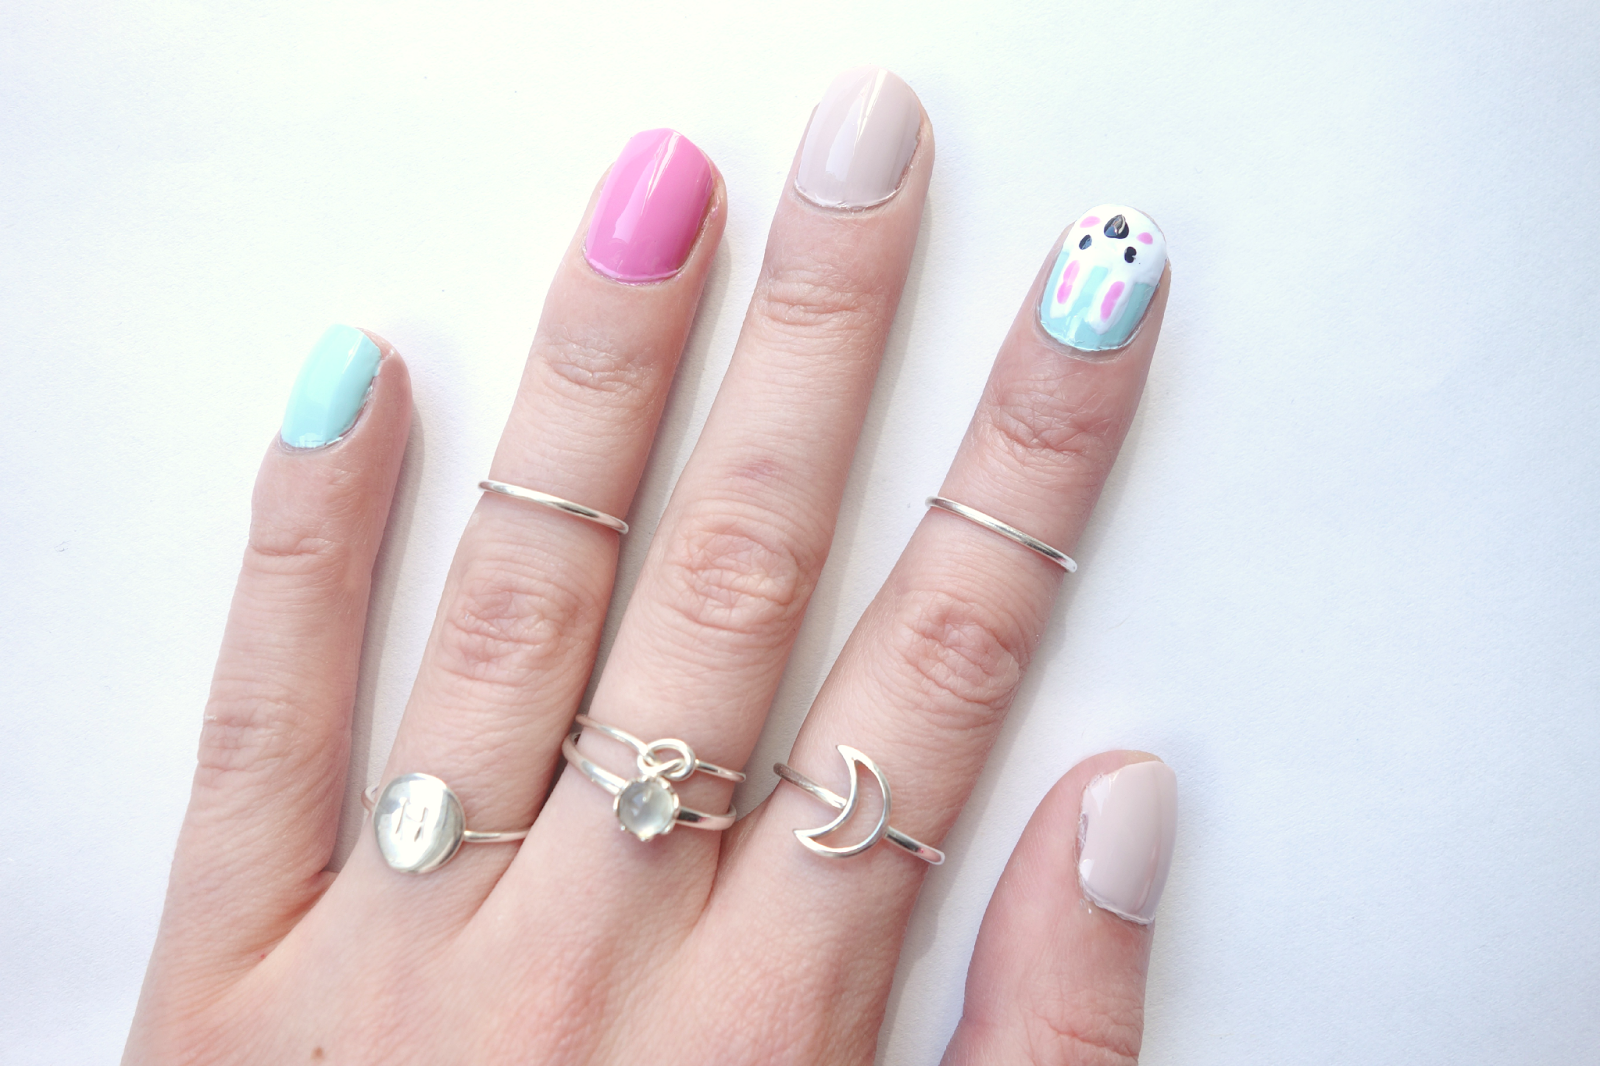 1. Cute Easter Bunny Nail Design Ideas - wide 3